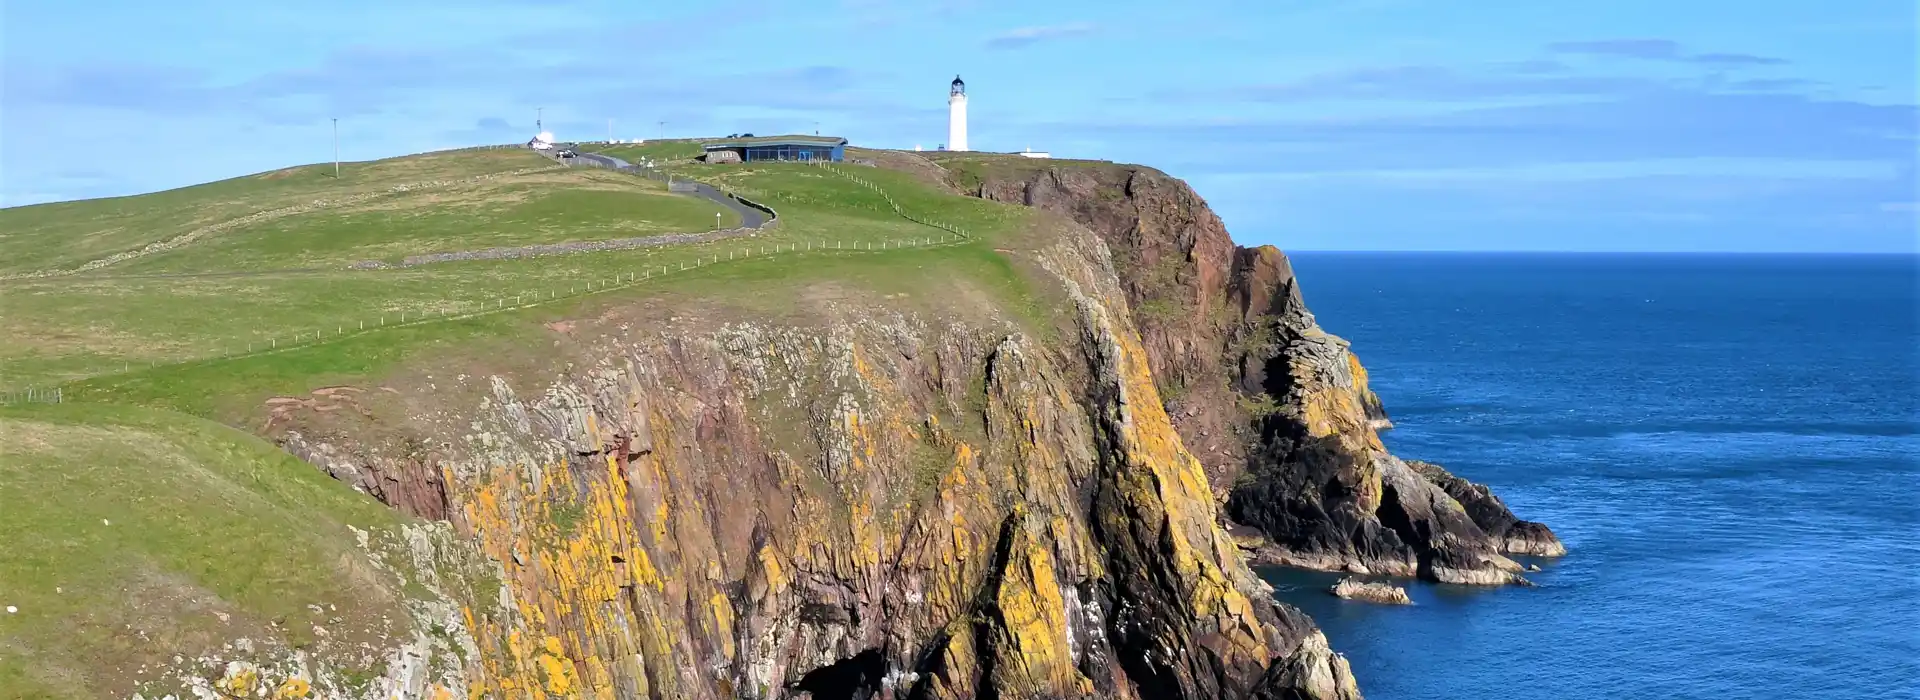 Campsites near the Mull of Galloway